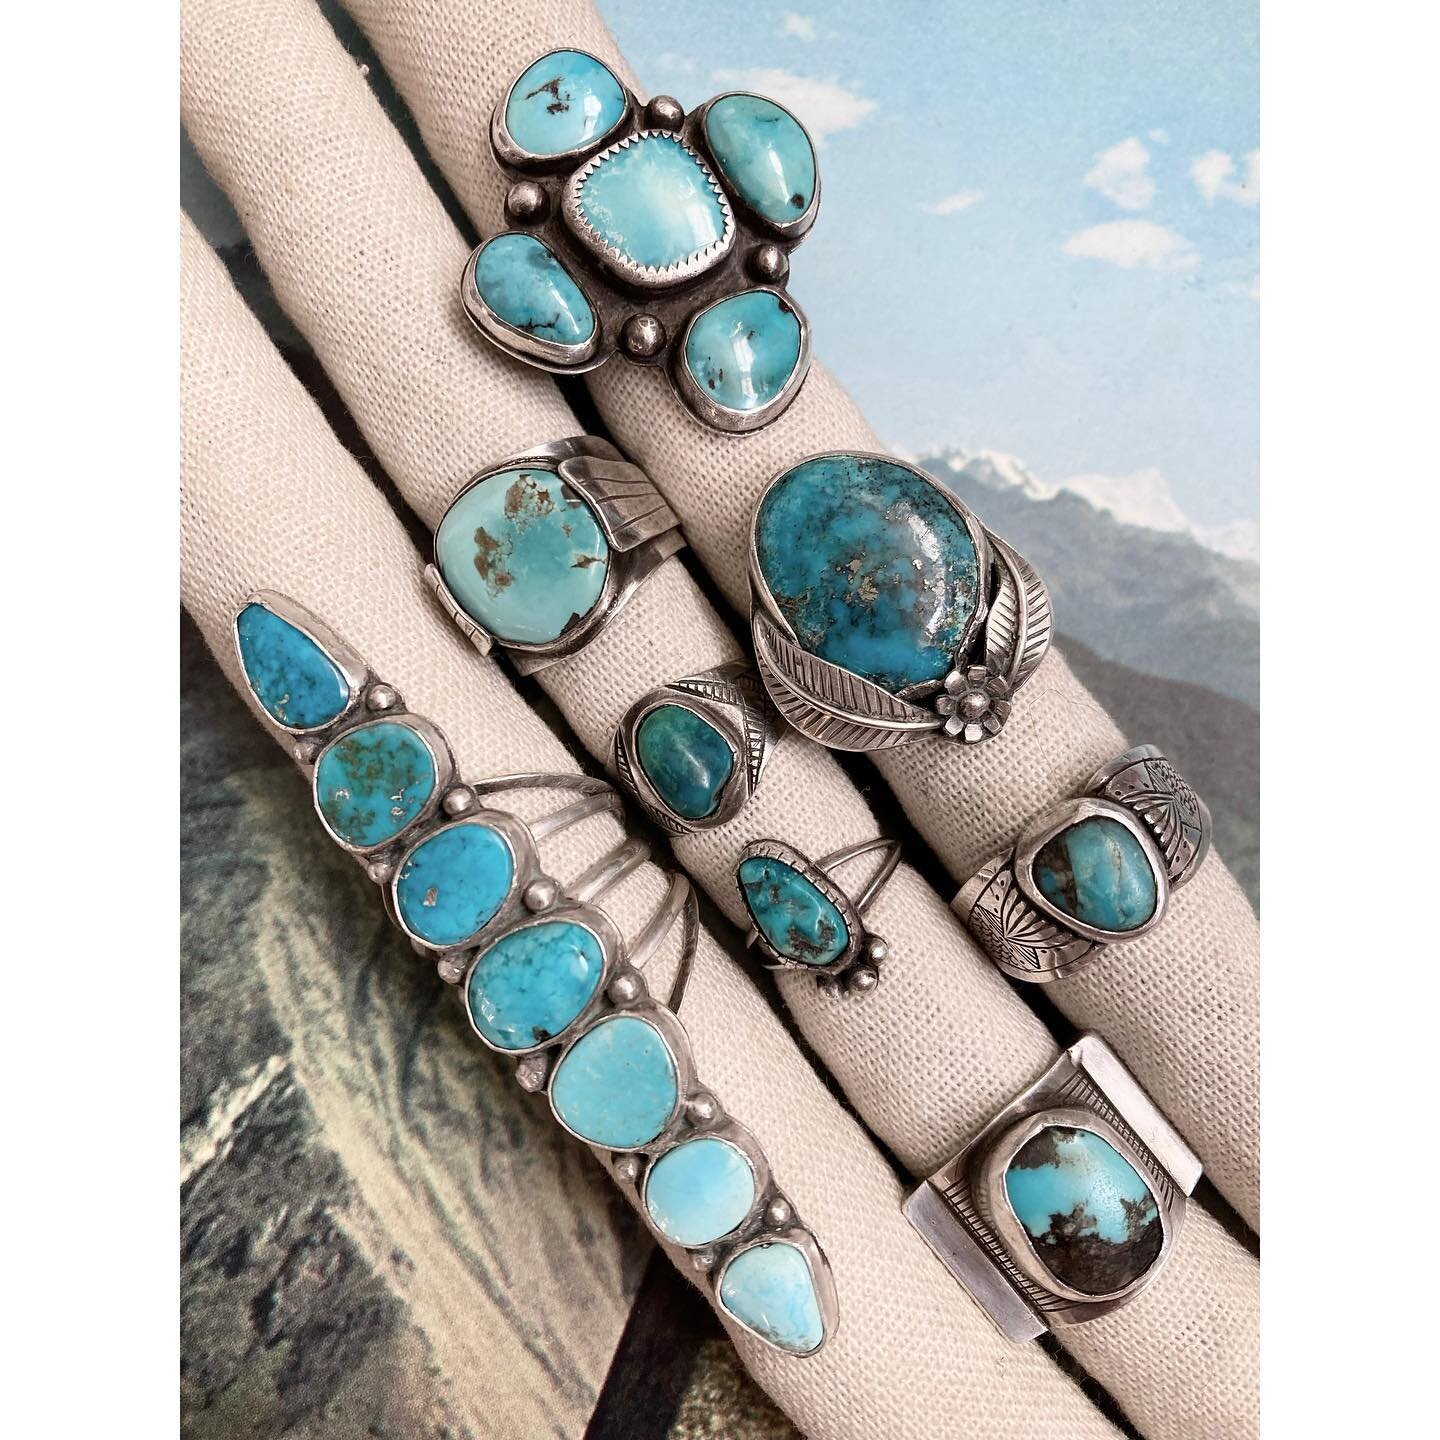 Timeless turquoise 💙

.
.
.
.
.
#turquoise #turquoiseoverdiamonds #turquoiseterritory #turquoisering #turquoisejewelry #silverring #silversmith #madeinbrooklyn #madeinnyc #bohojewelry #bohoring #southwesternjewelry #showmeyourrings #occultring #stat